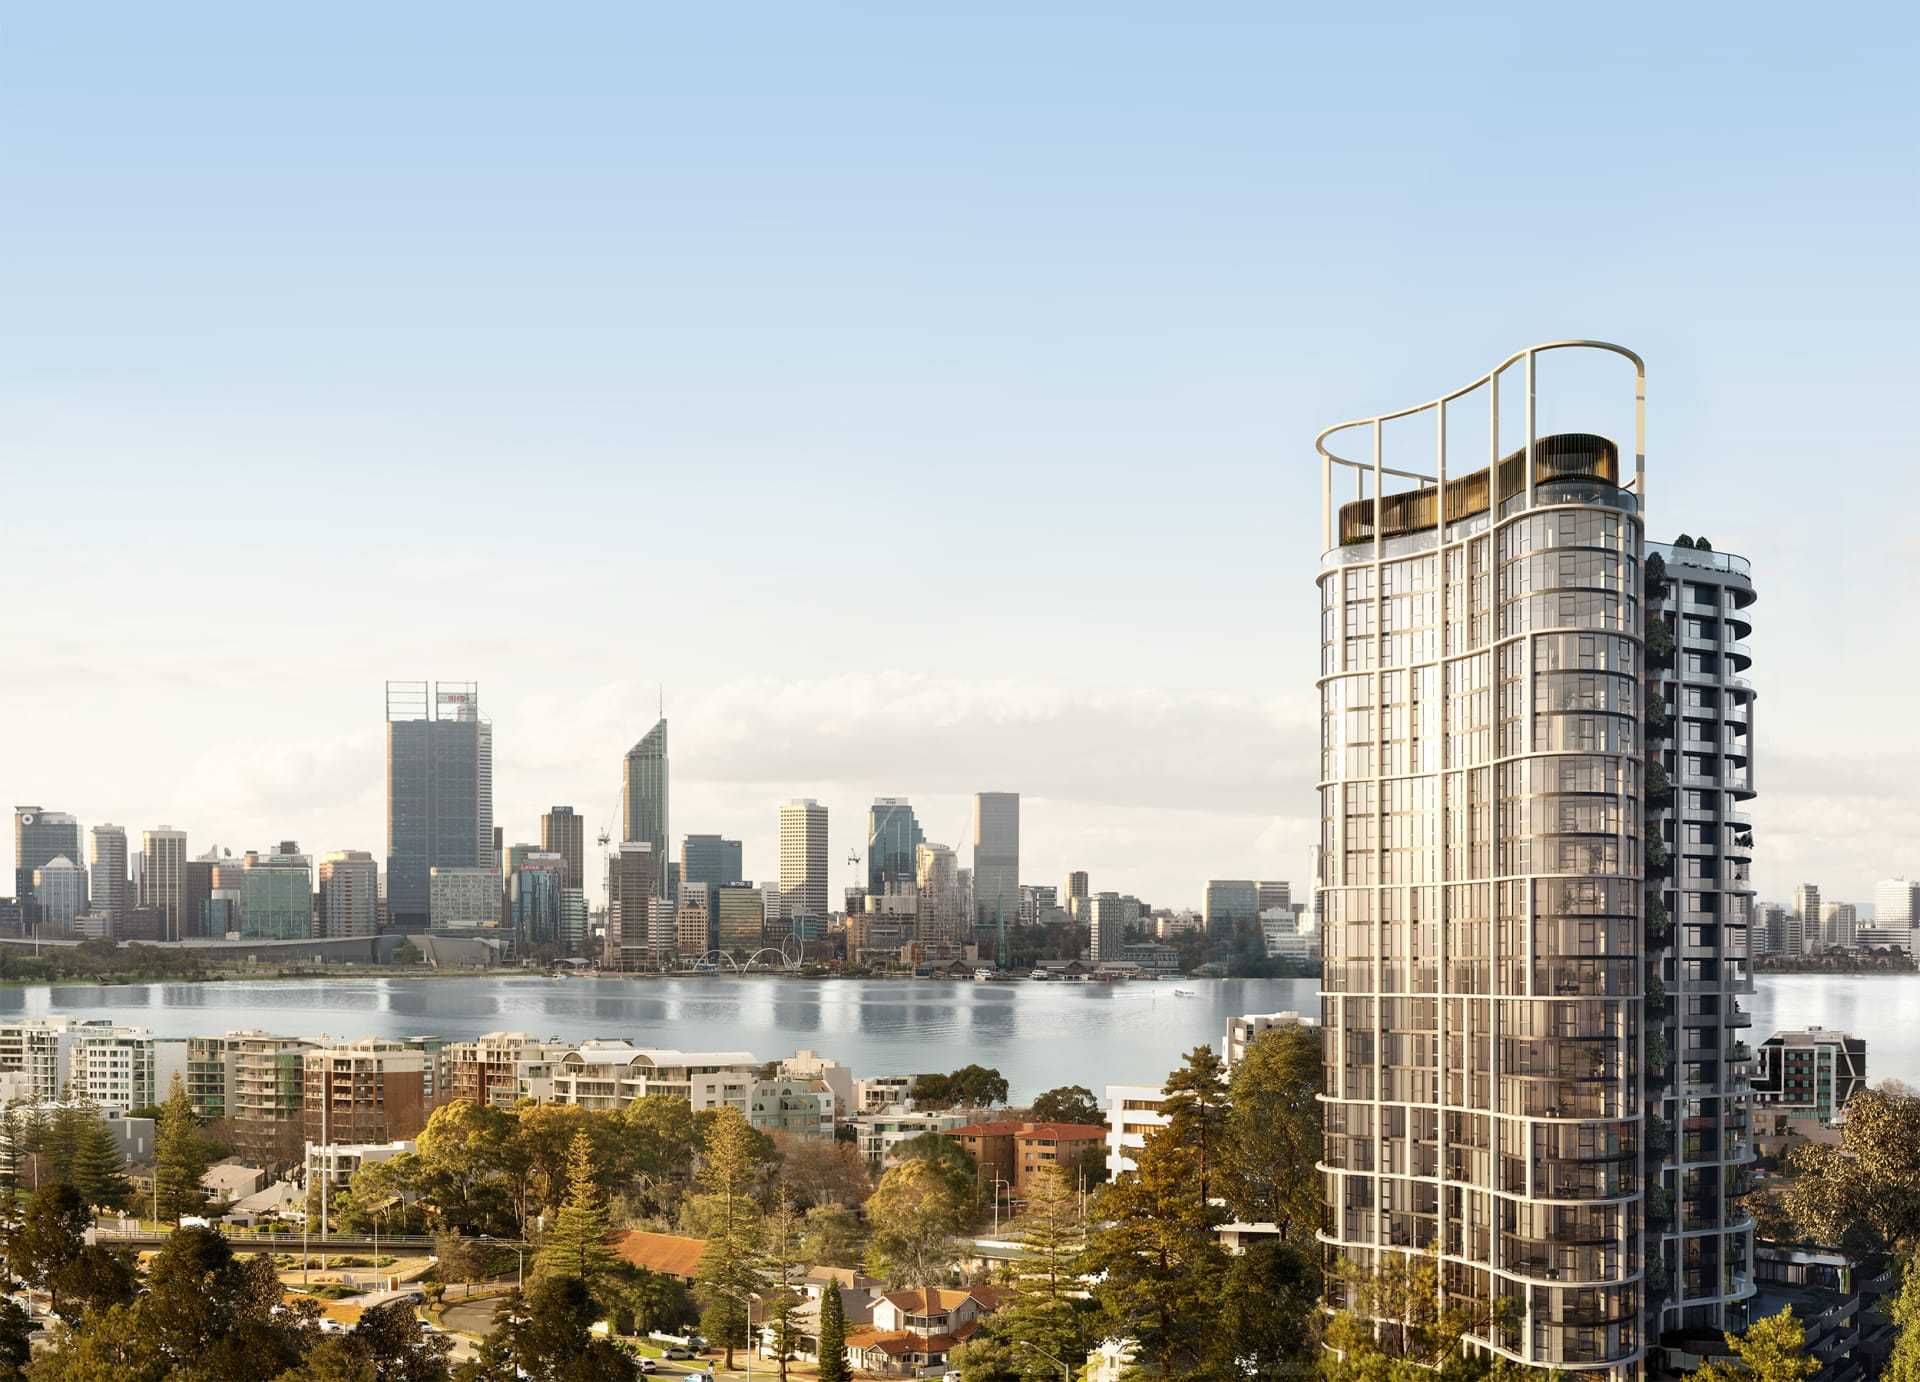 Perth's top four off the plan apartment developments with a 5 Star Green Star rating